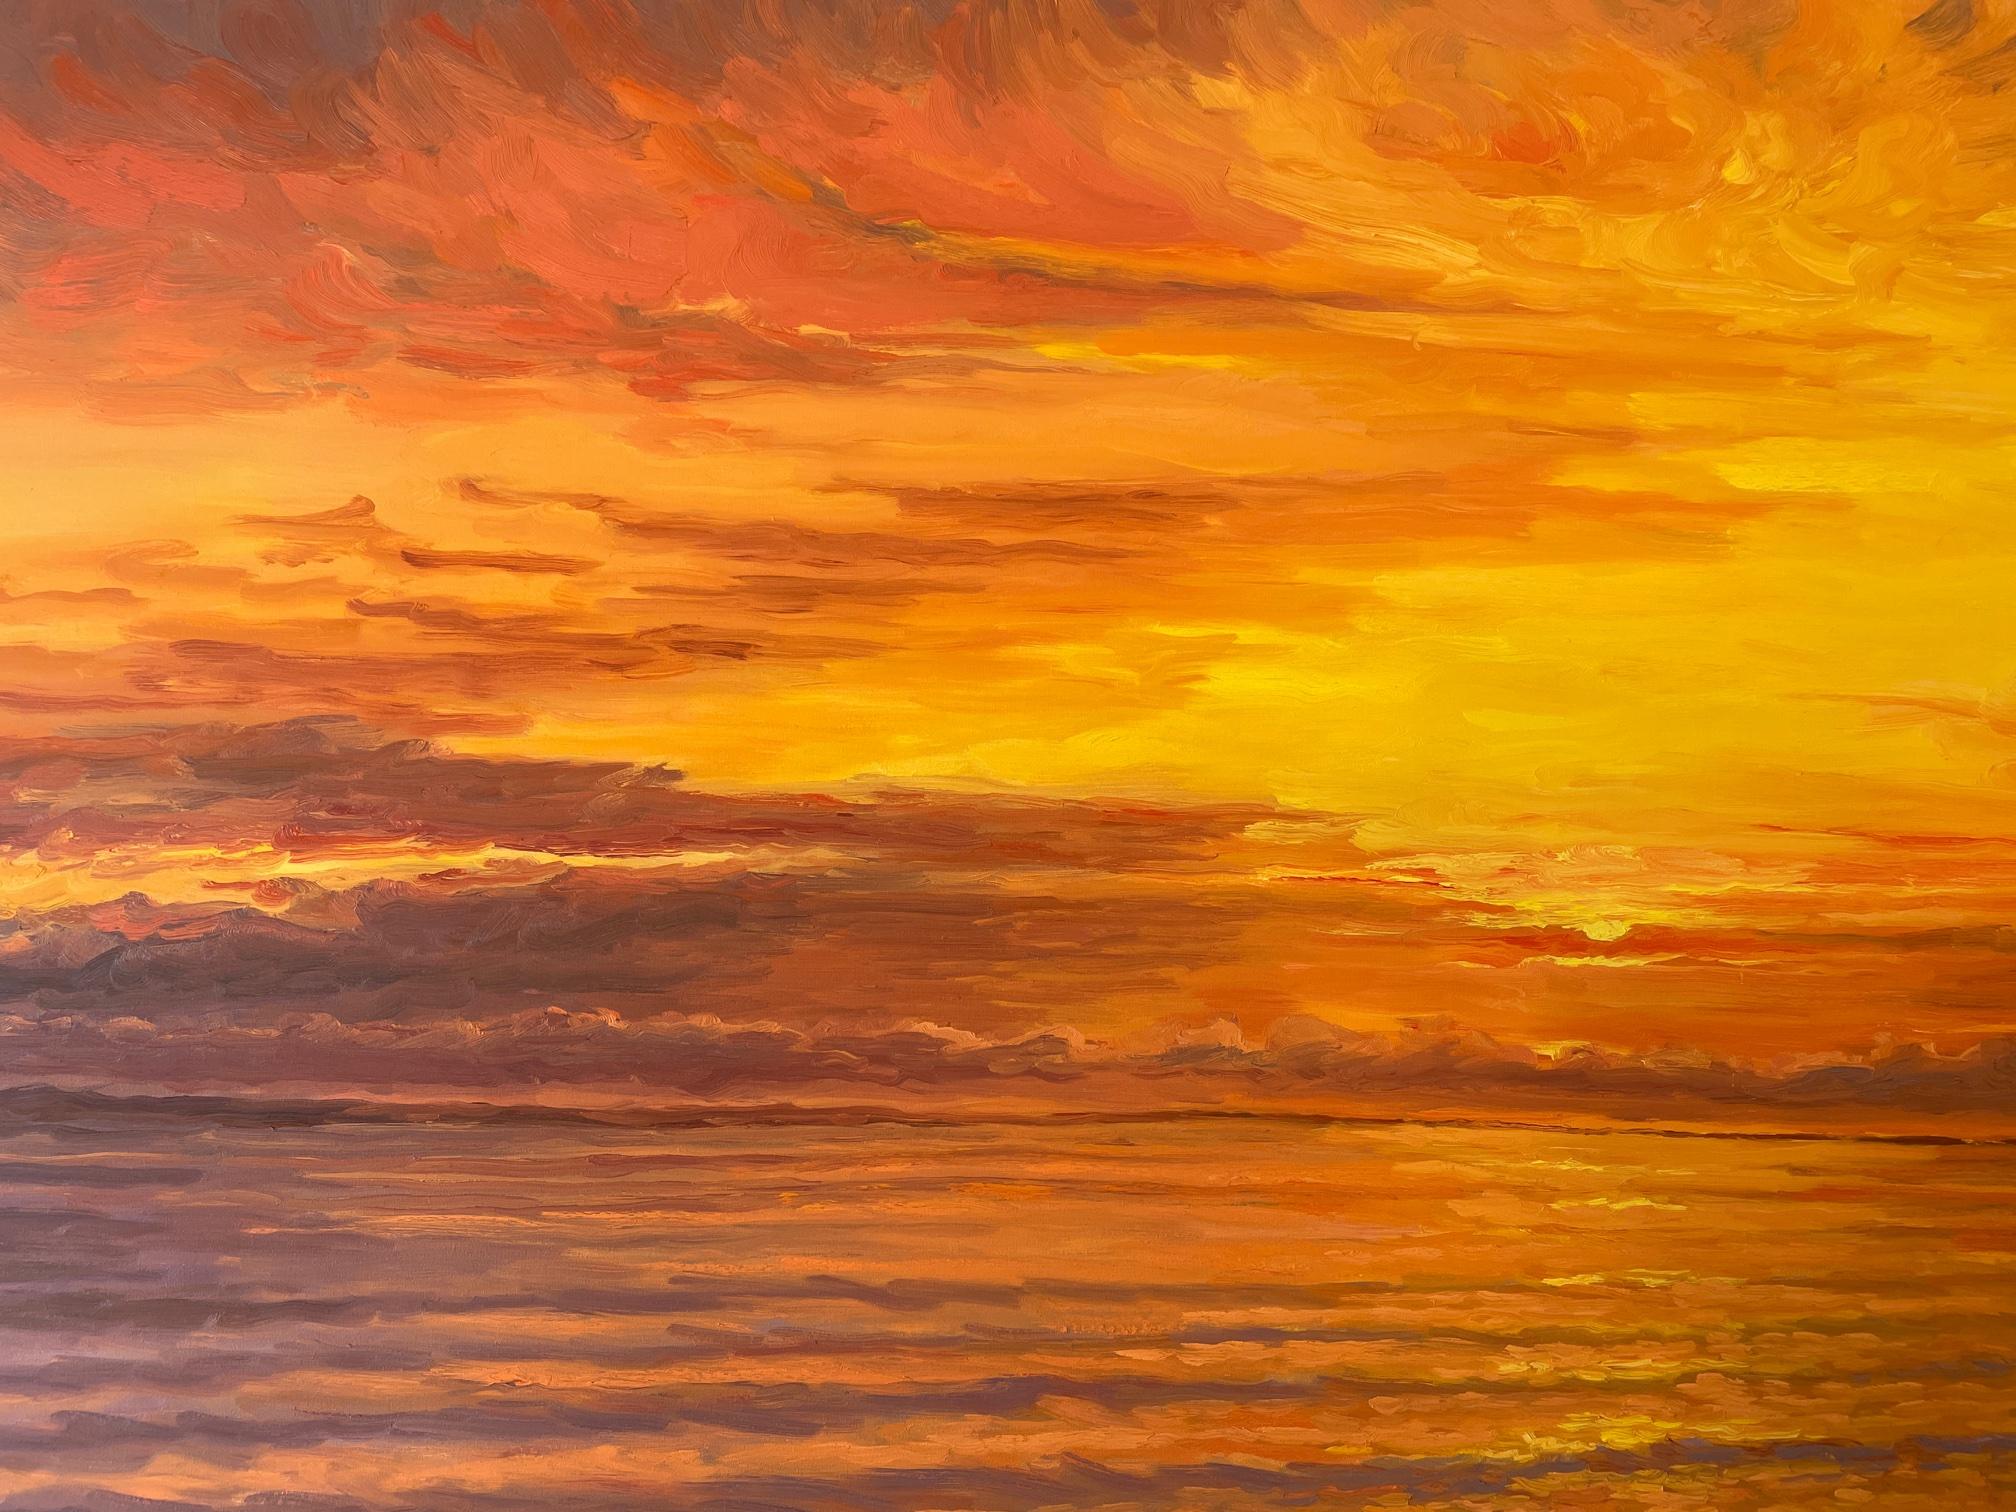 titles for sunset paintings